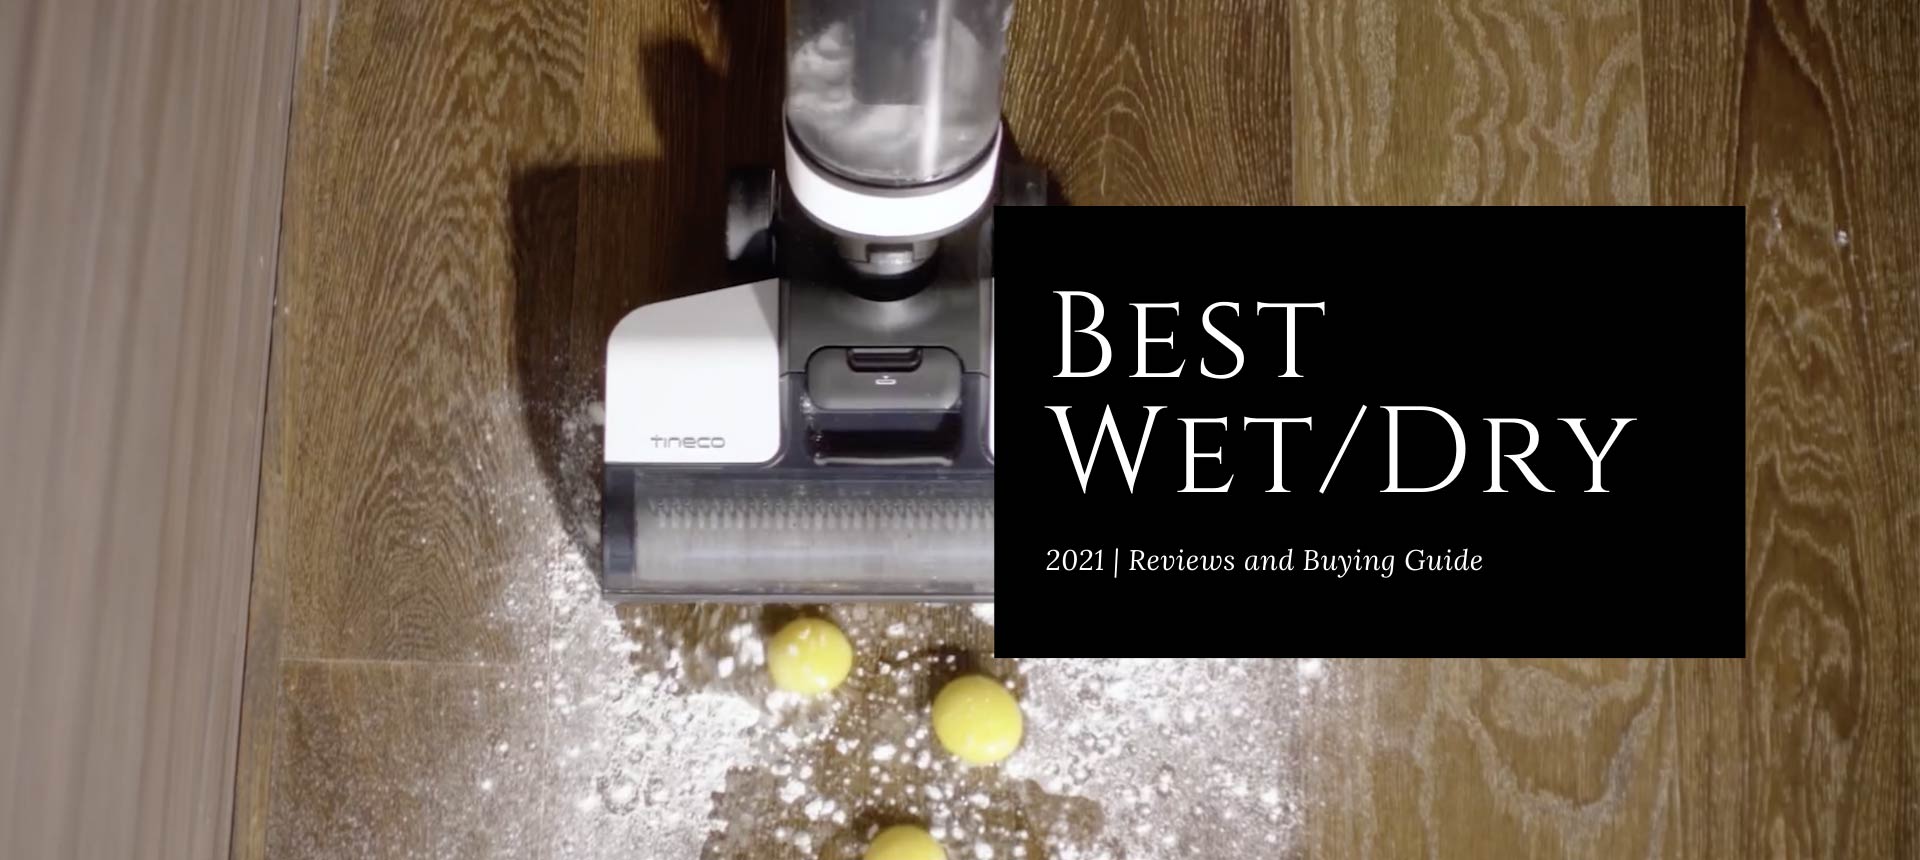 Best Wet/Dry Vacuums of 2021: Reviews & Guide